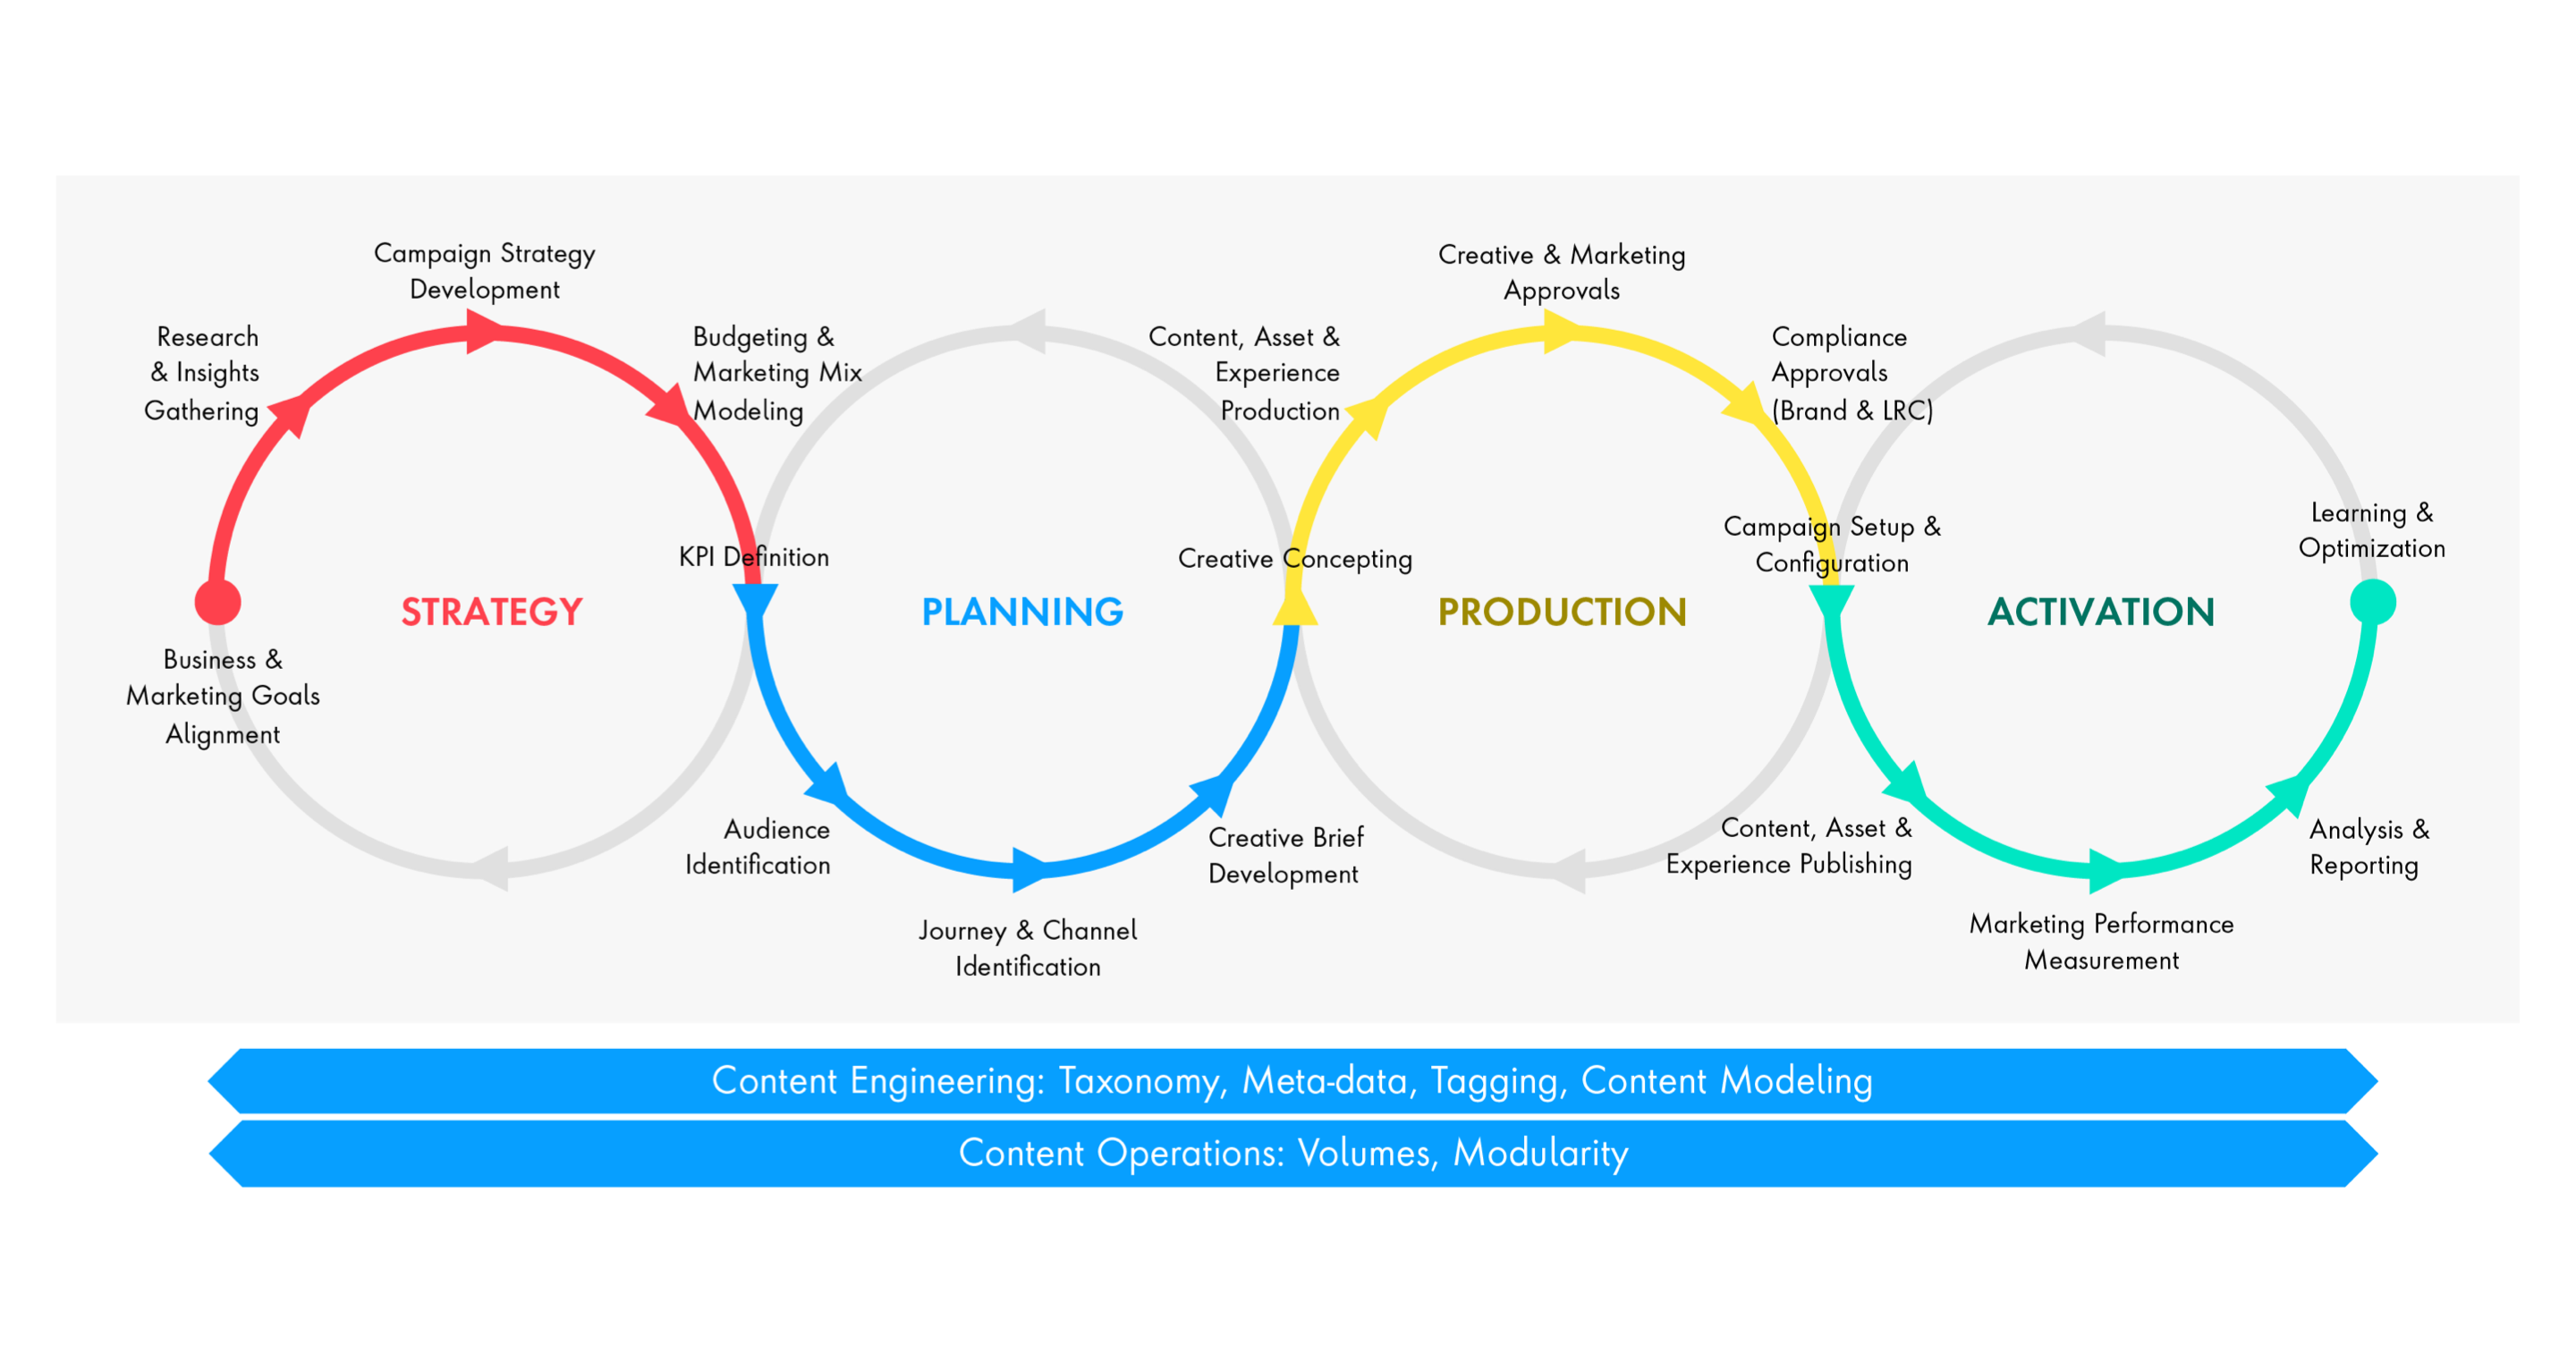 Illustration of key capabilities spanning the entire content lifecycle, form planning to activation.